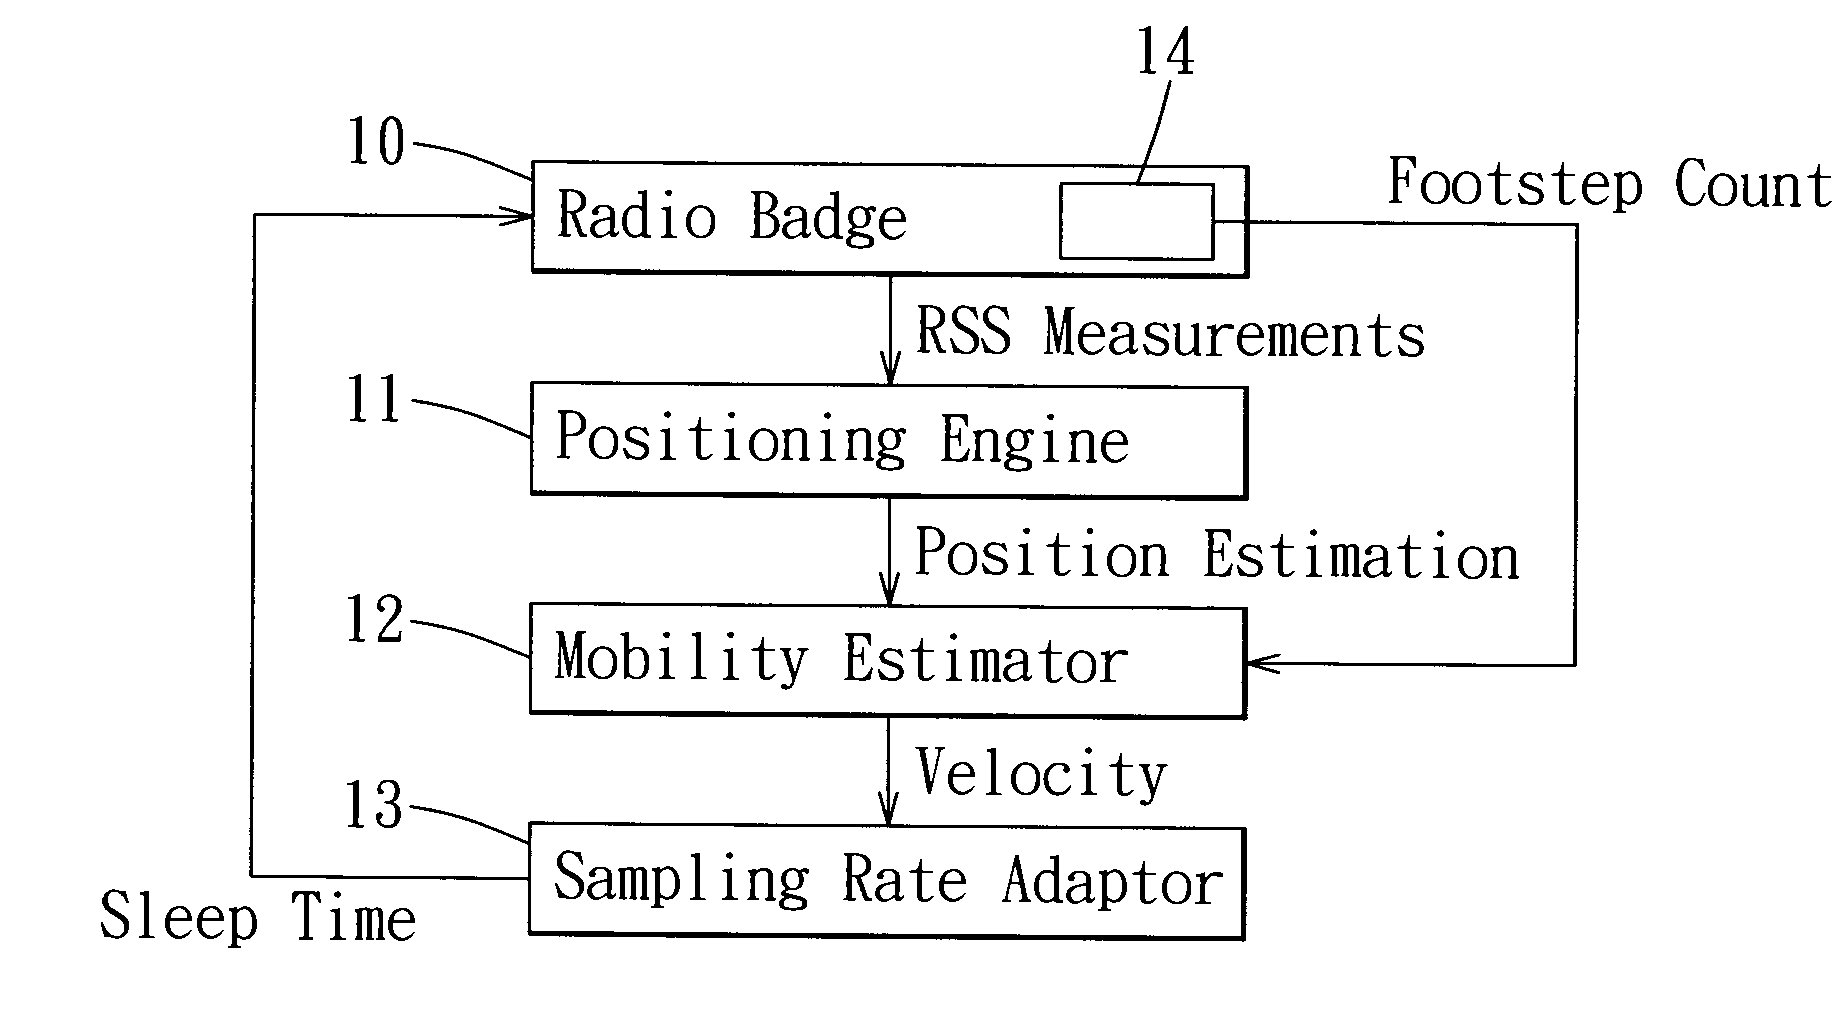 Energy-efficient indoor localization system and a method of reducing power consumption of a radio badge in the indoor localization system